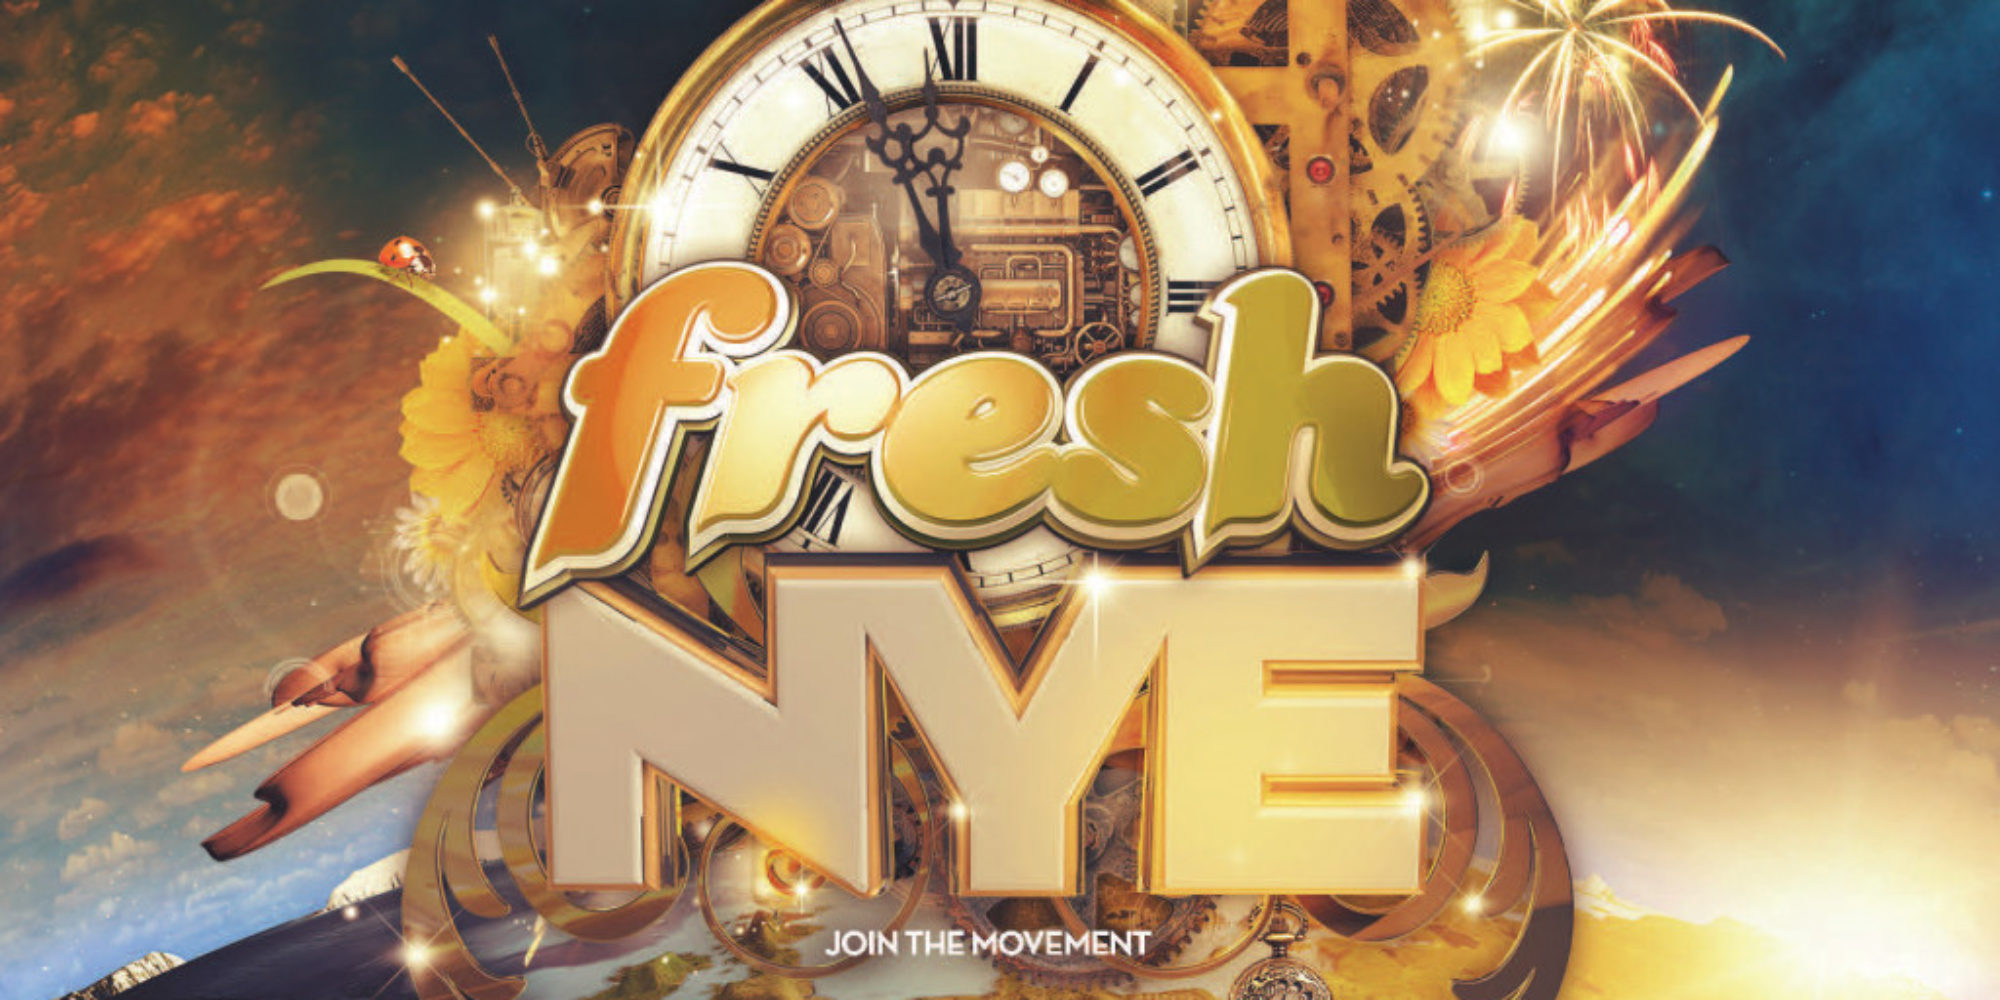 Fresh NYE Hotels almost sold out!